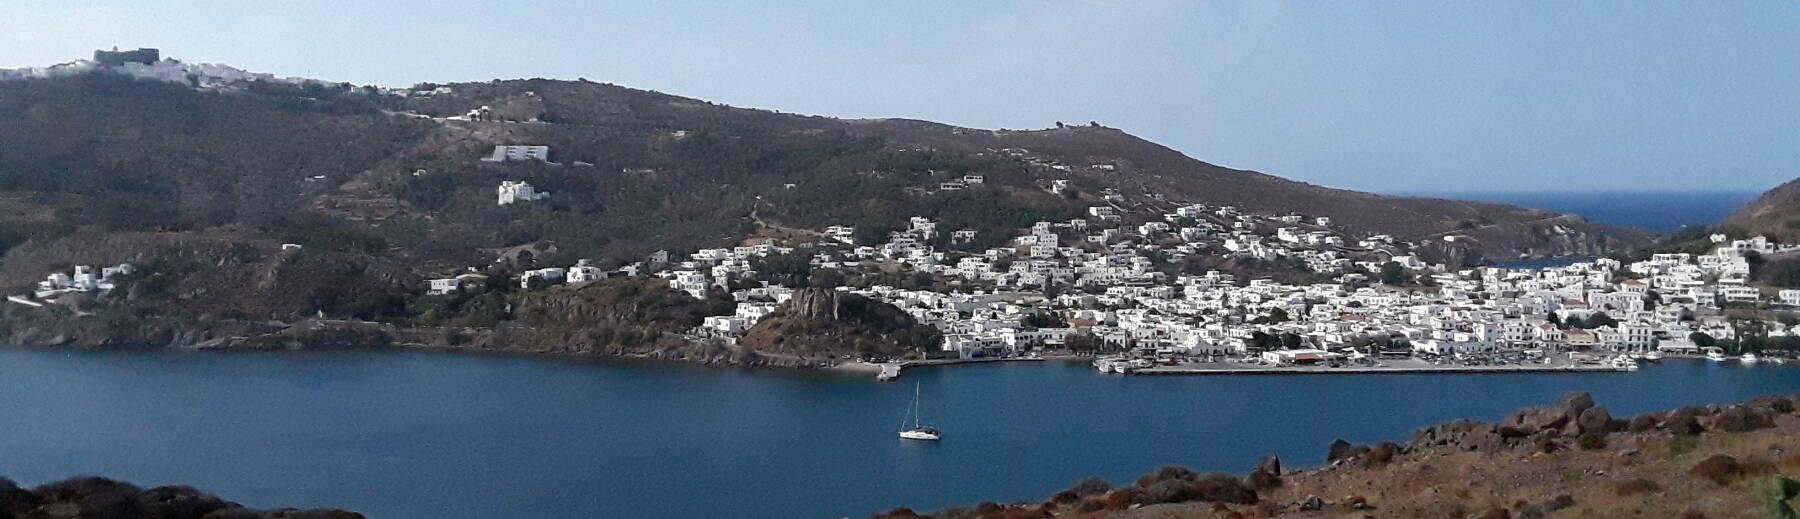 Looking across Patmos harbor to the Cave of the Apocalypse and the Monastery of John the Theologian.